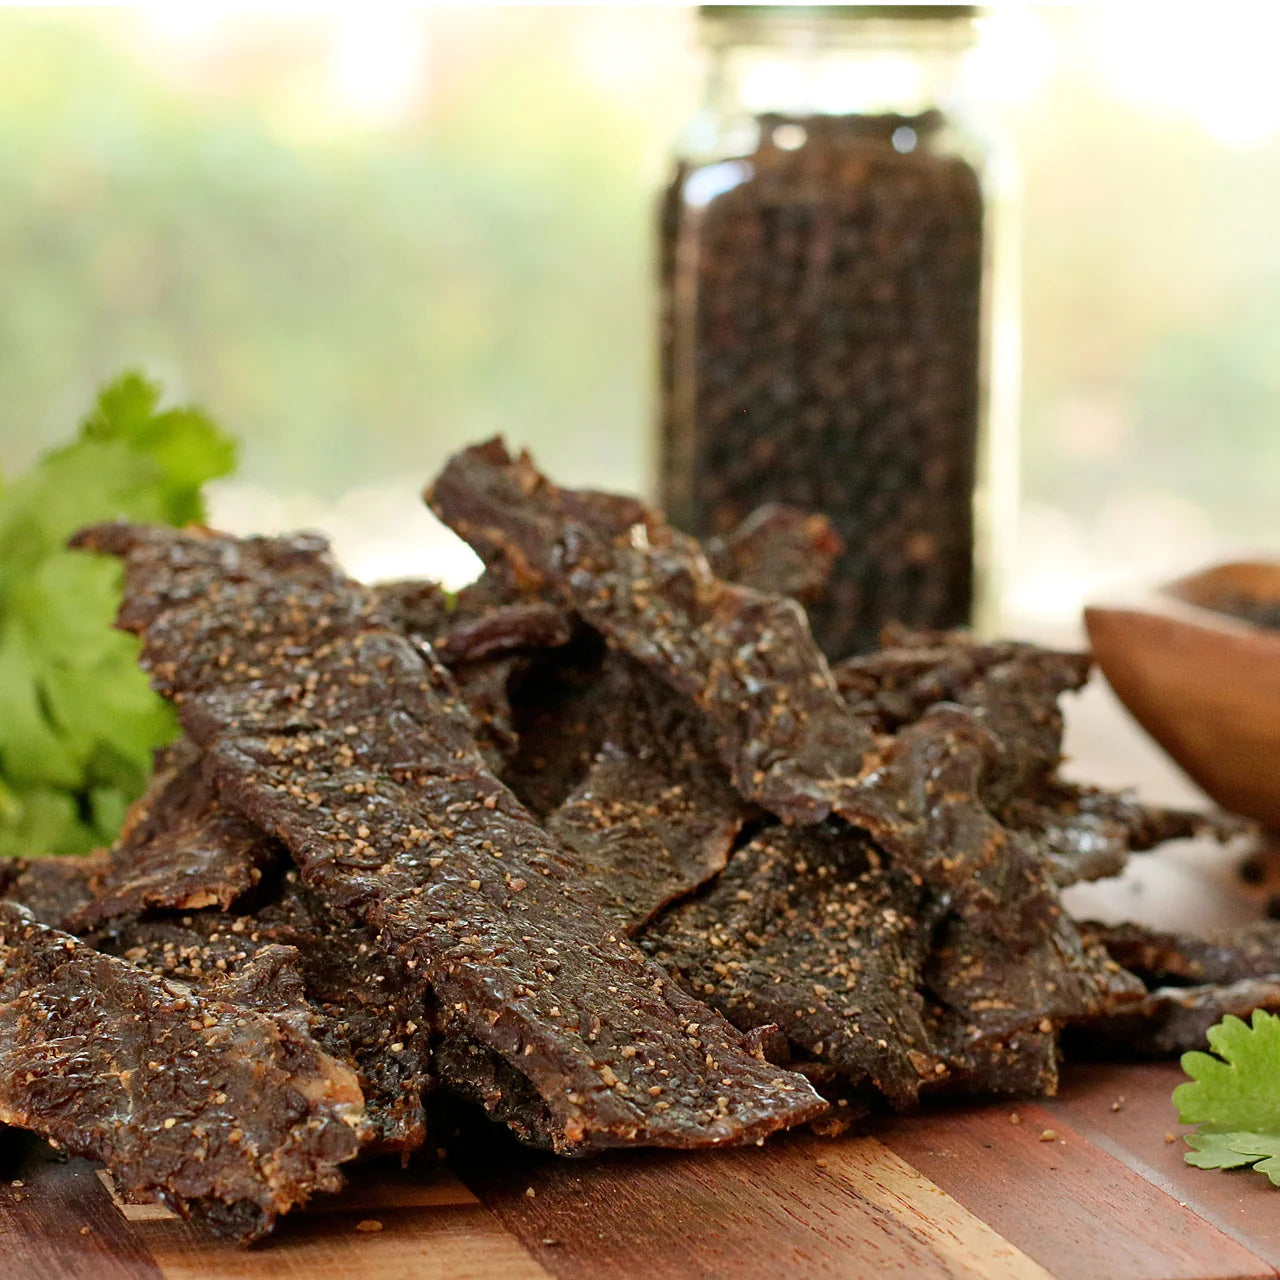 What Is Biltong? — Is Biltong Healthier Than Jerky?